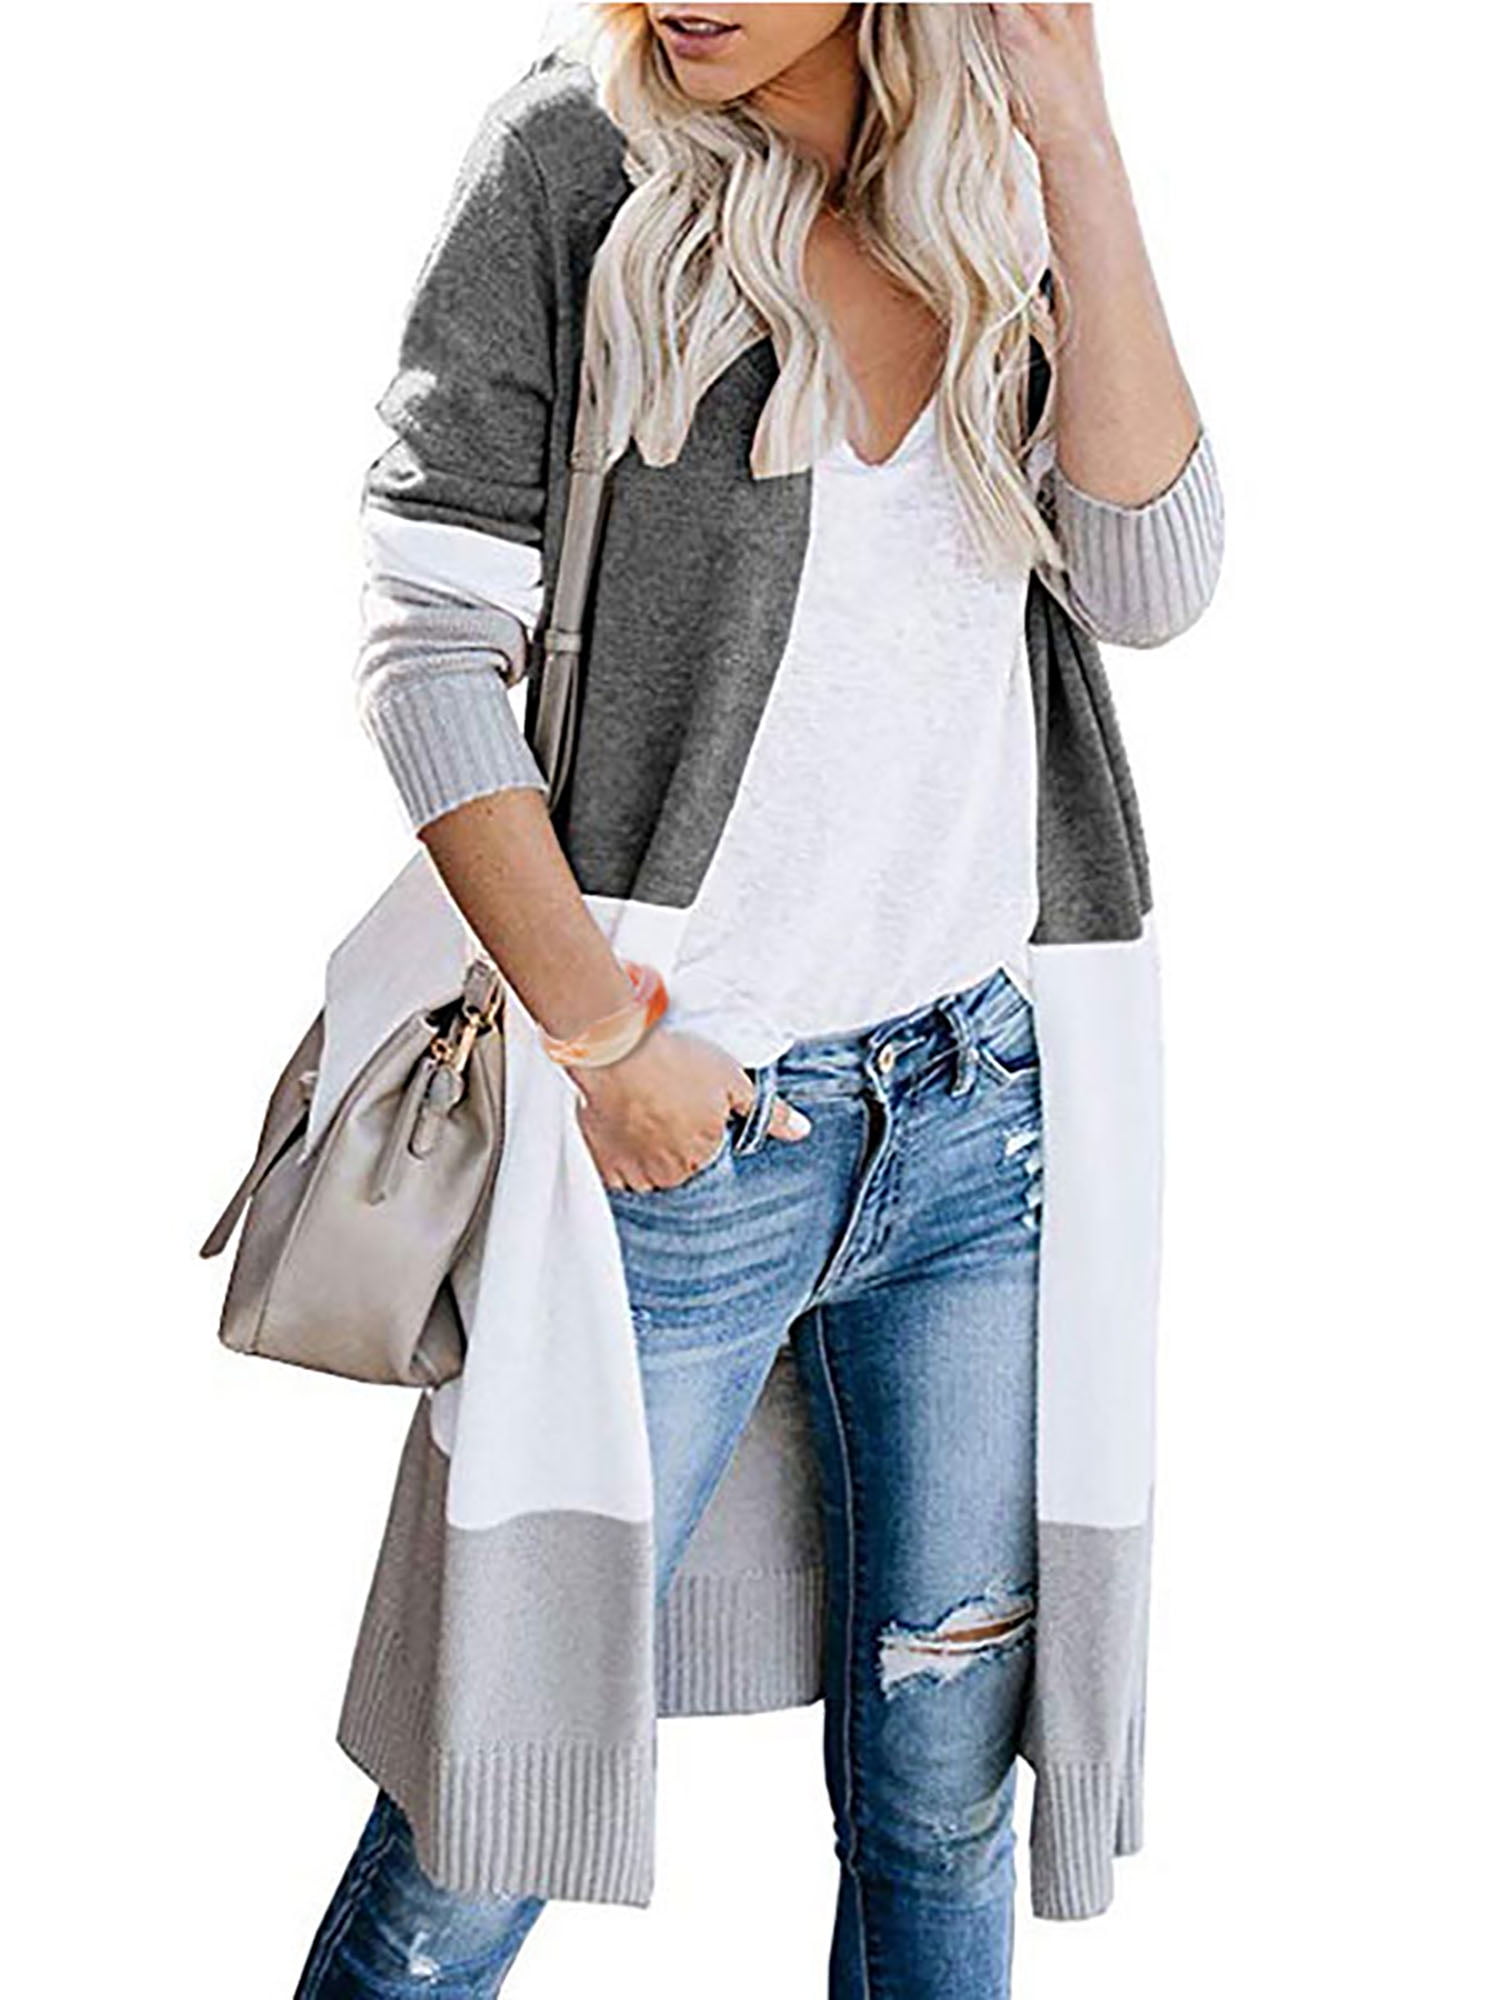 Femmes Casual manches longues tricot Cardigan Loose Sweater Outwear manteau pull 